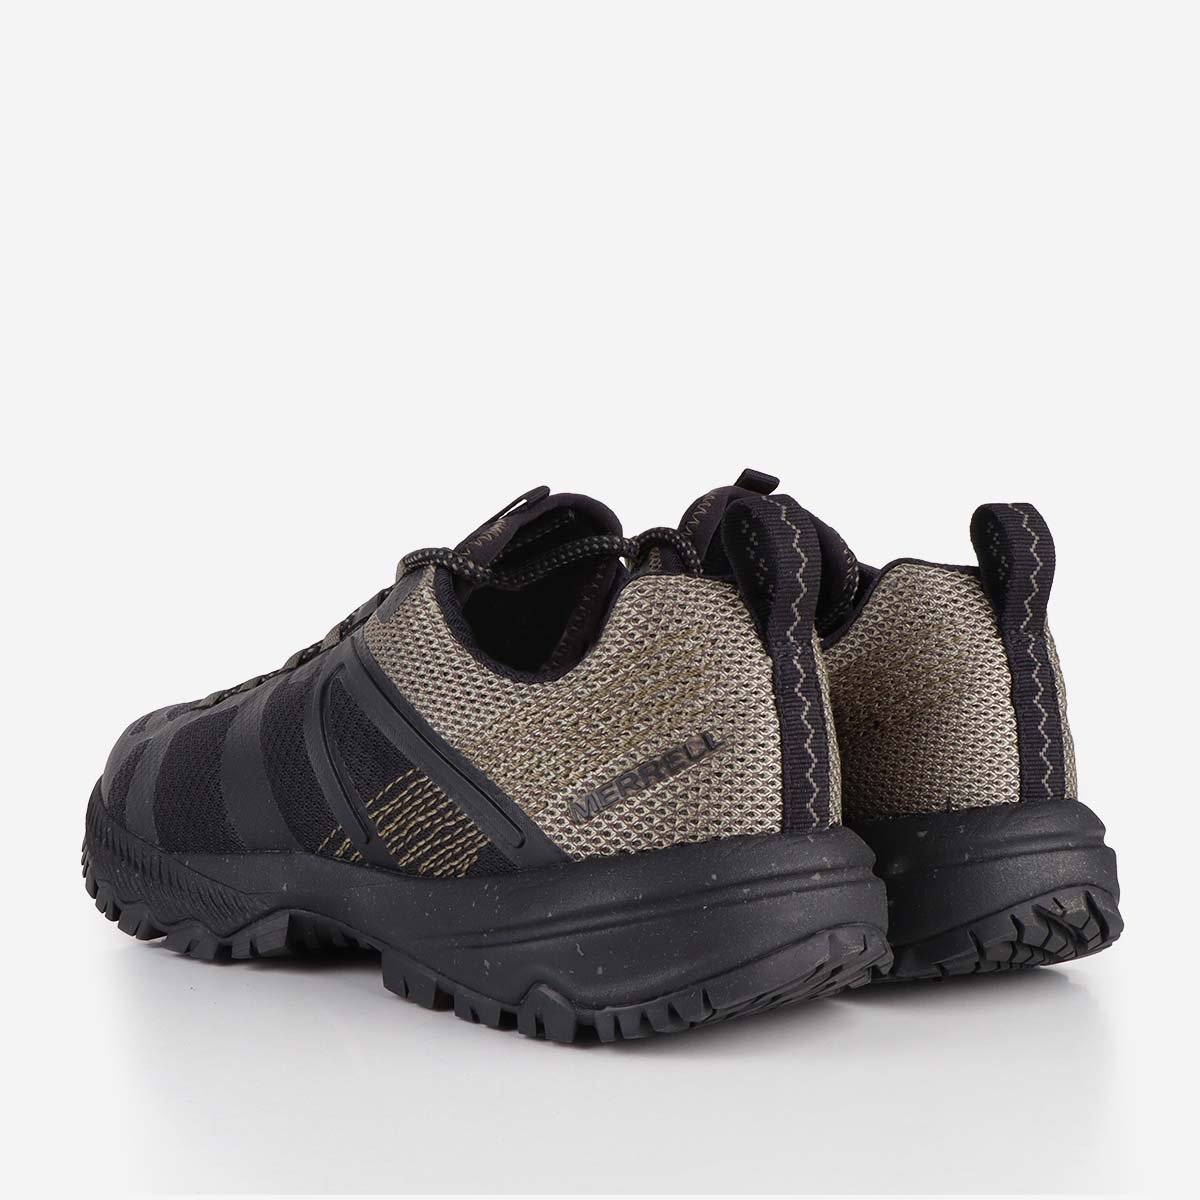 Merrell MQM Ace Leather FP 1TRL Shoes